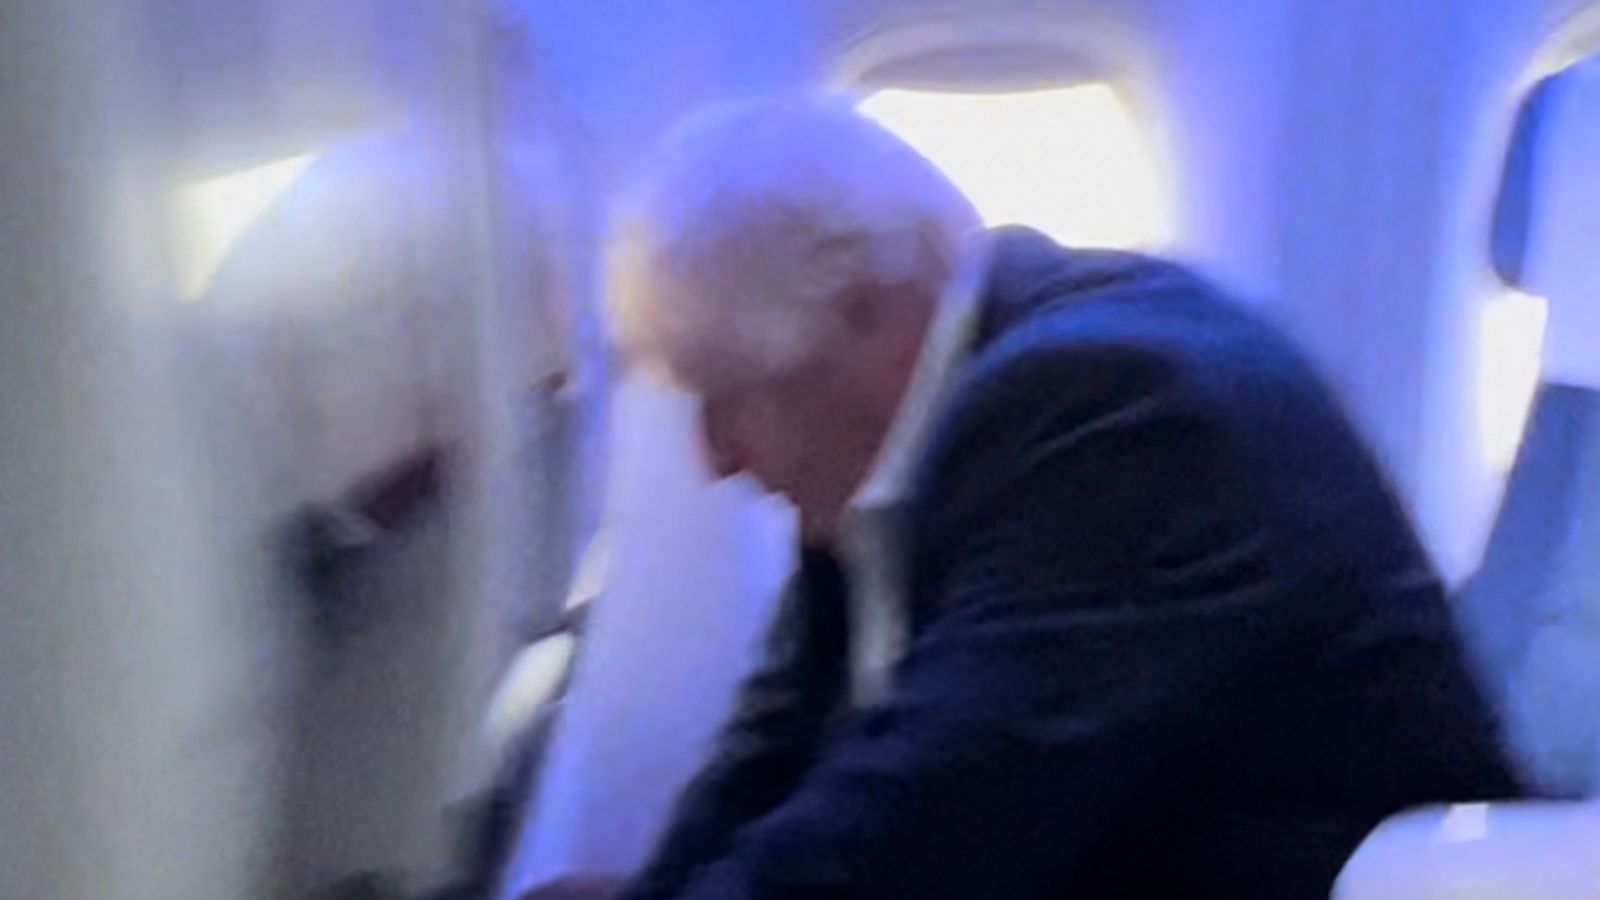 Boris Johnson sits in economy for flight back to UK - after telling an ally he will run to be PM again